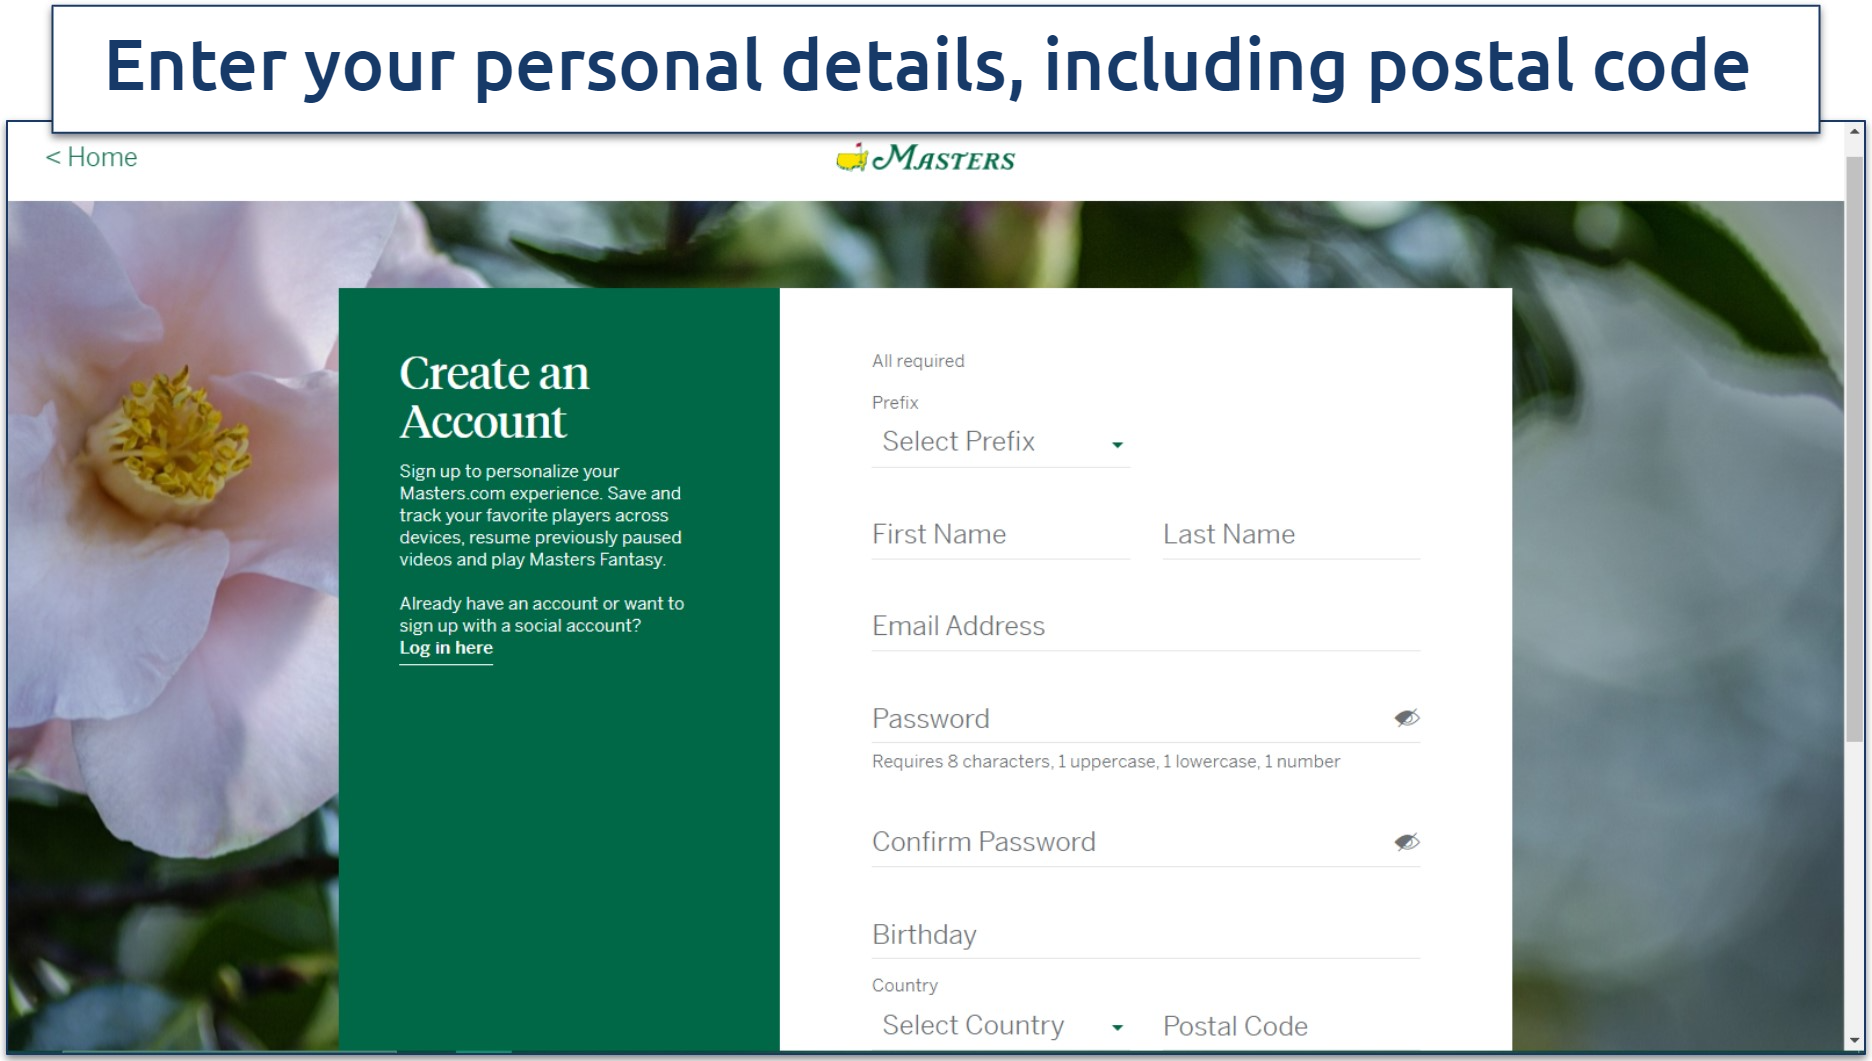 Entering personal details to create an account on the Masters official website